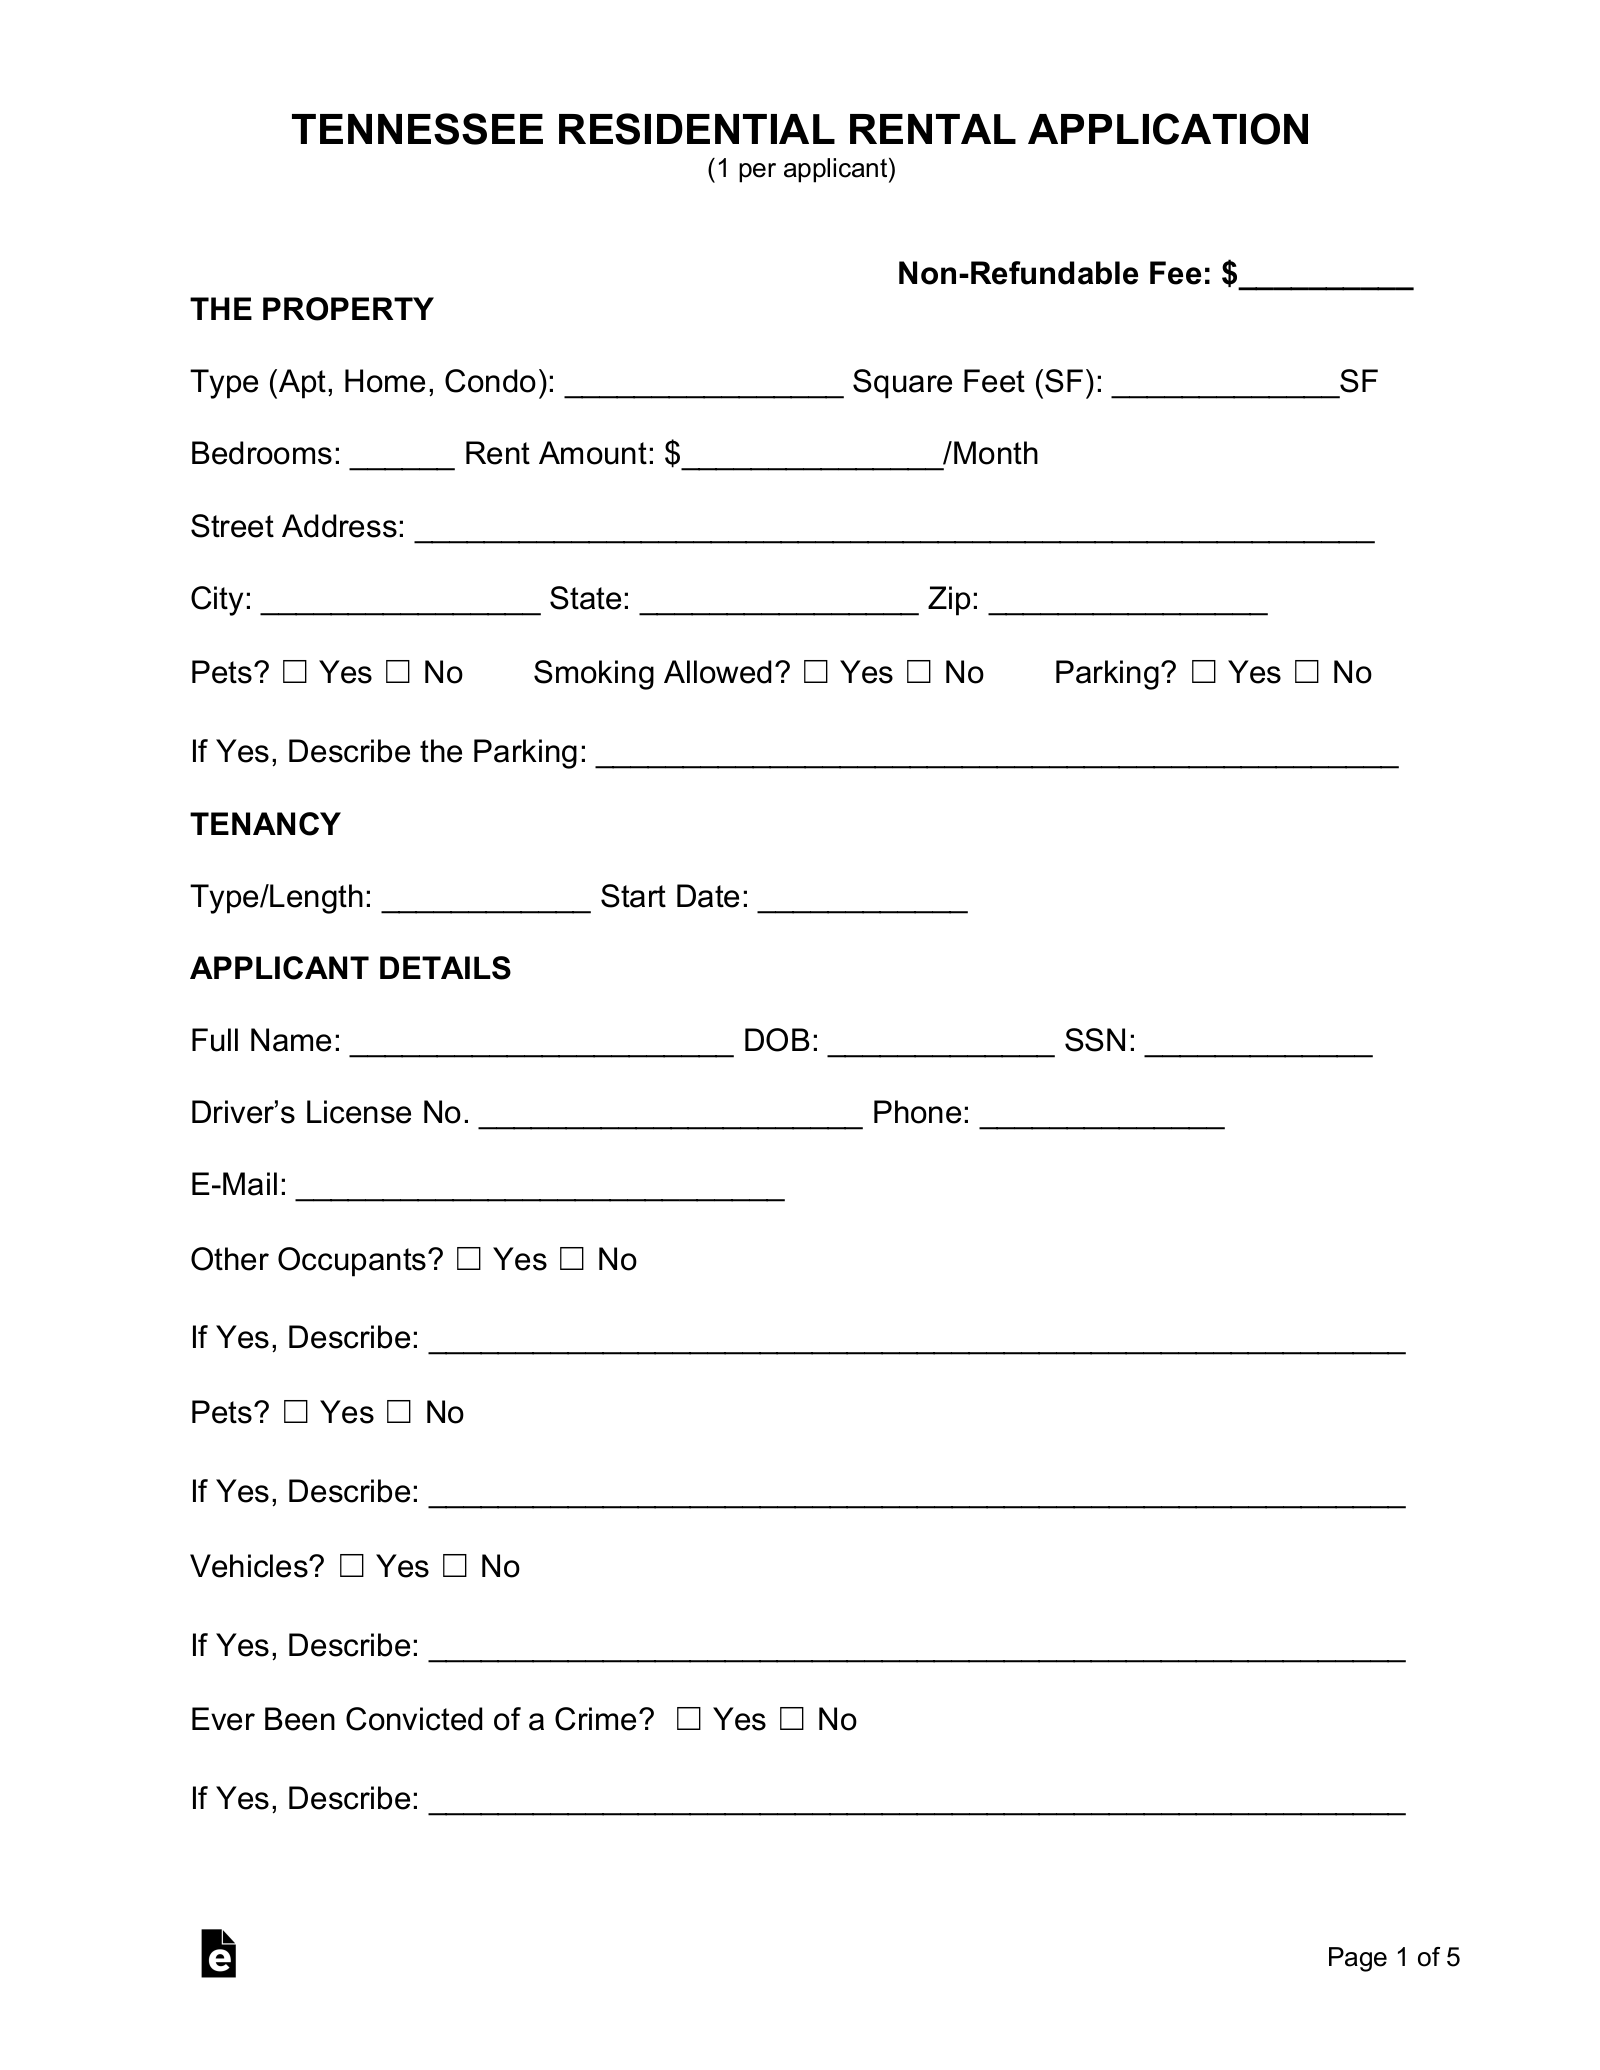 free-tennessee-rental-application-form-pdf-word-eforms